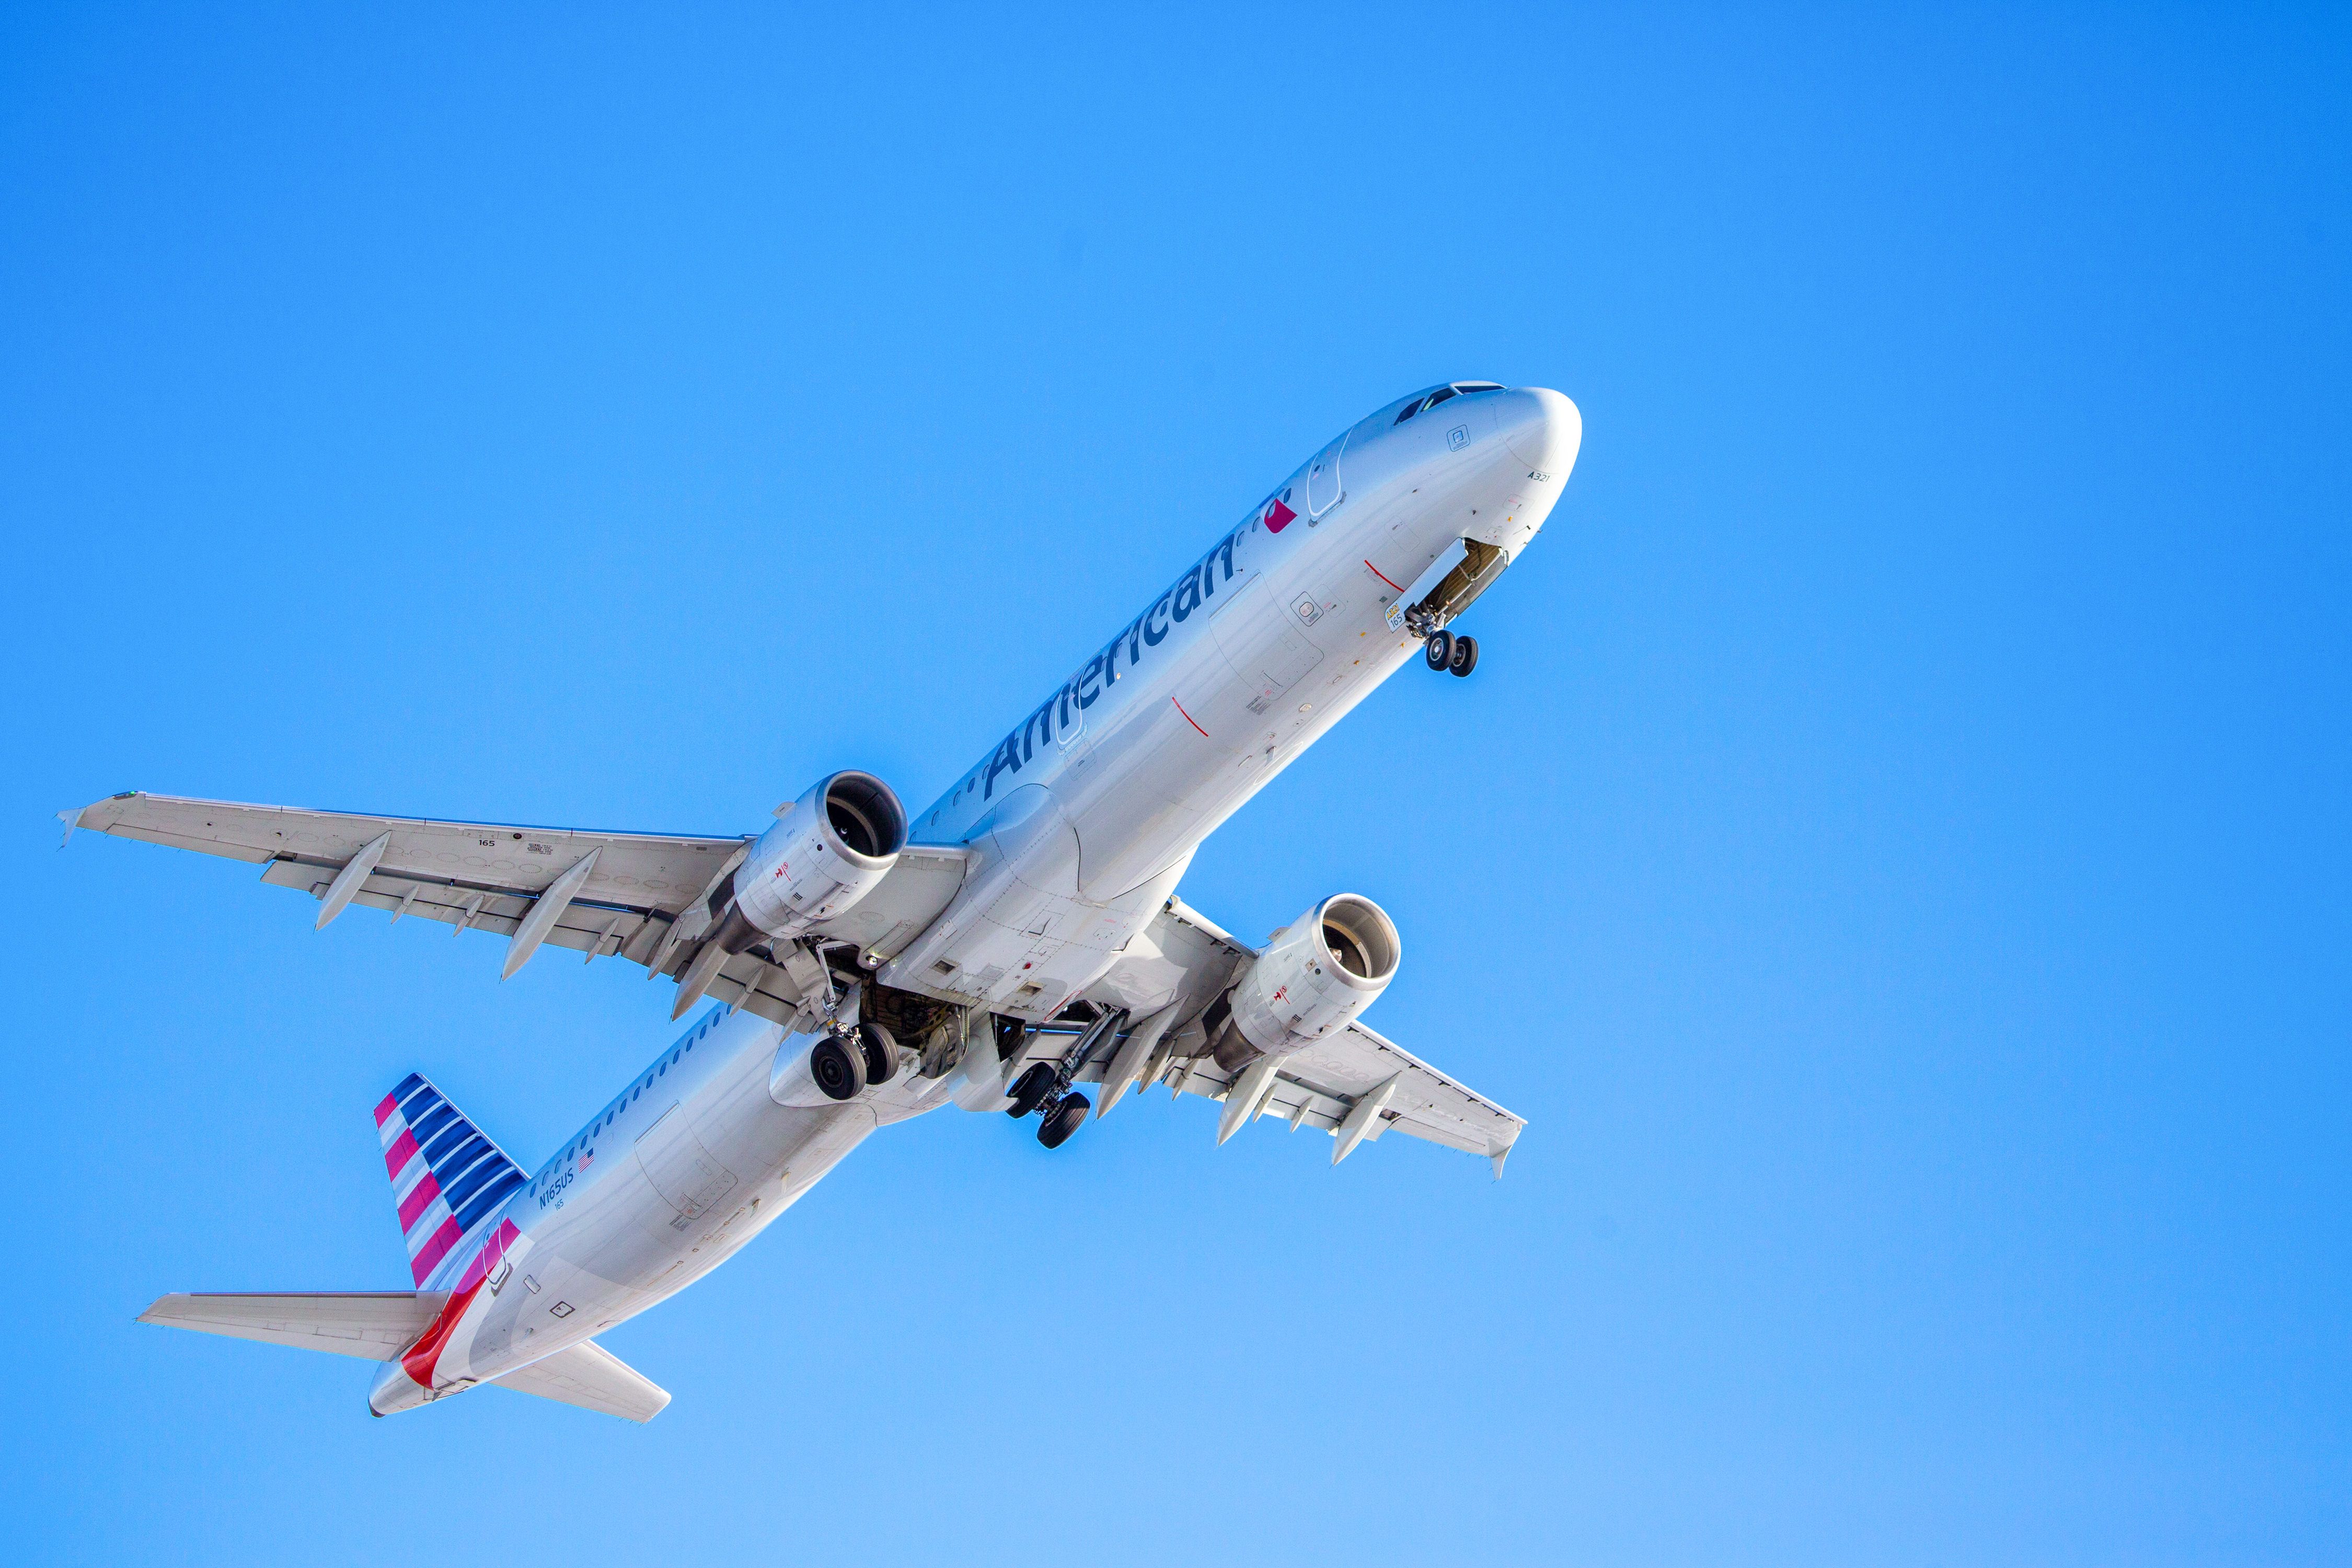 American Airlines plane taking off